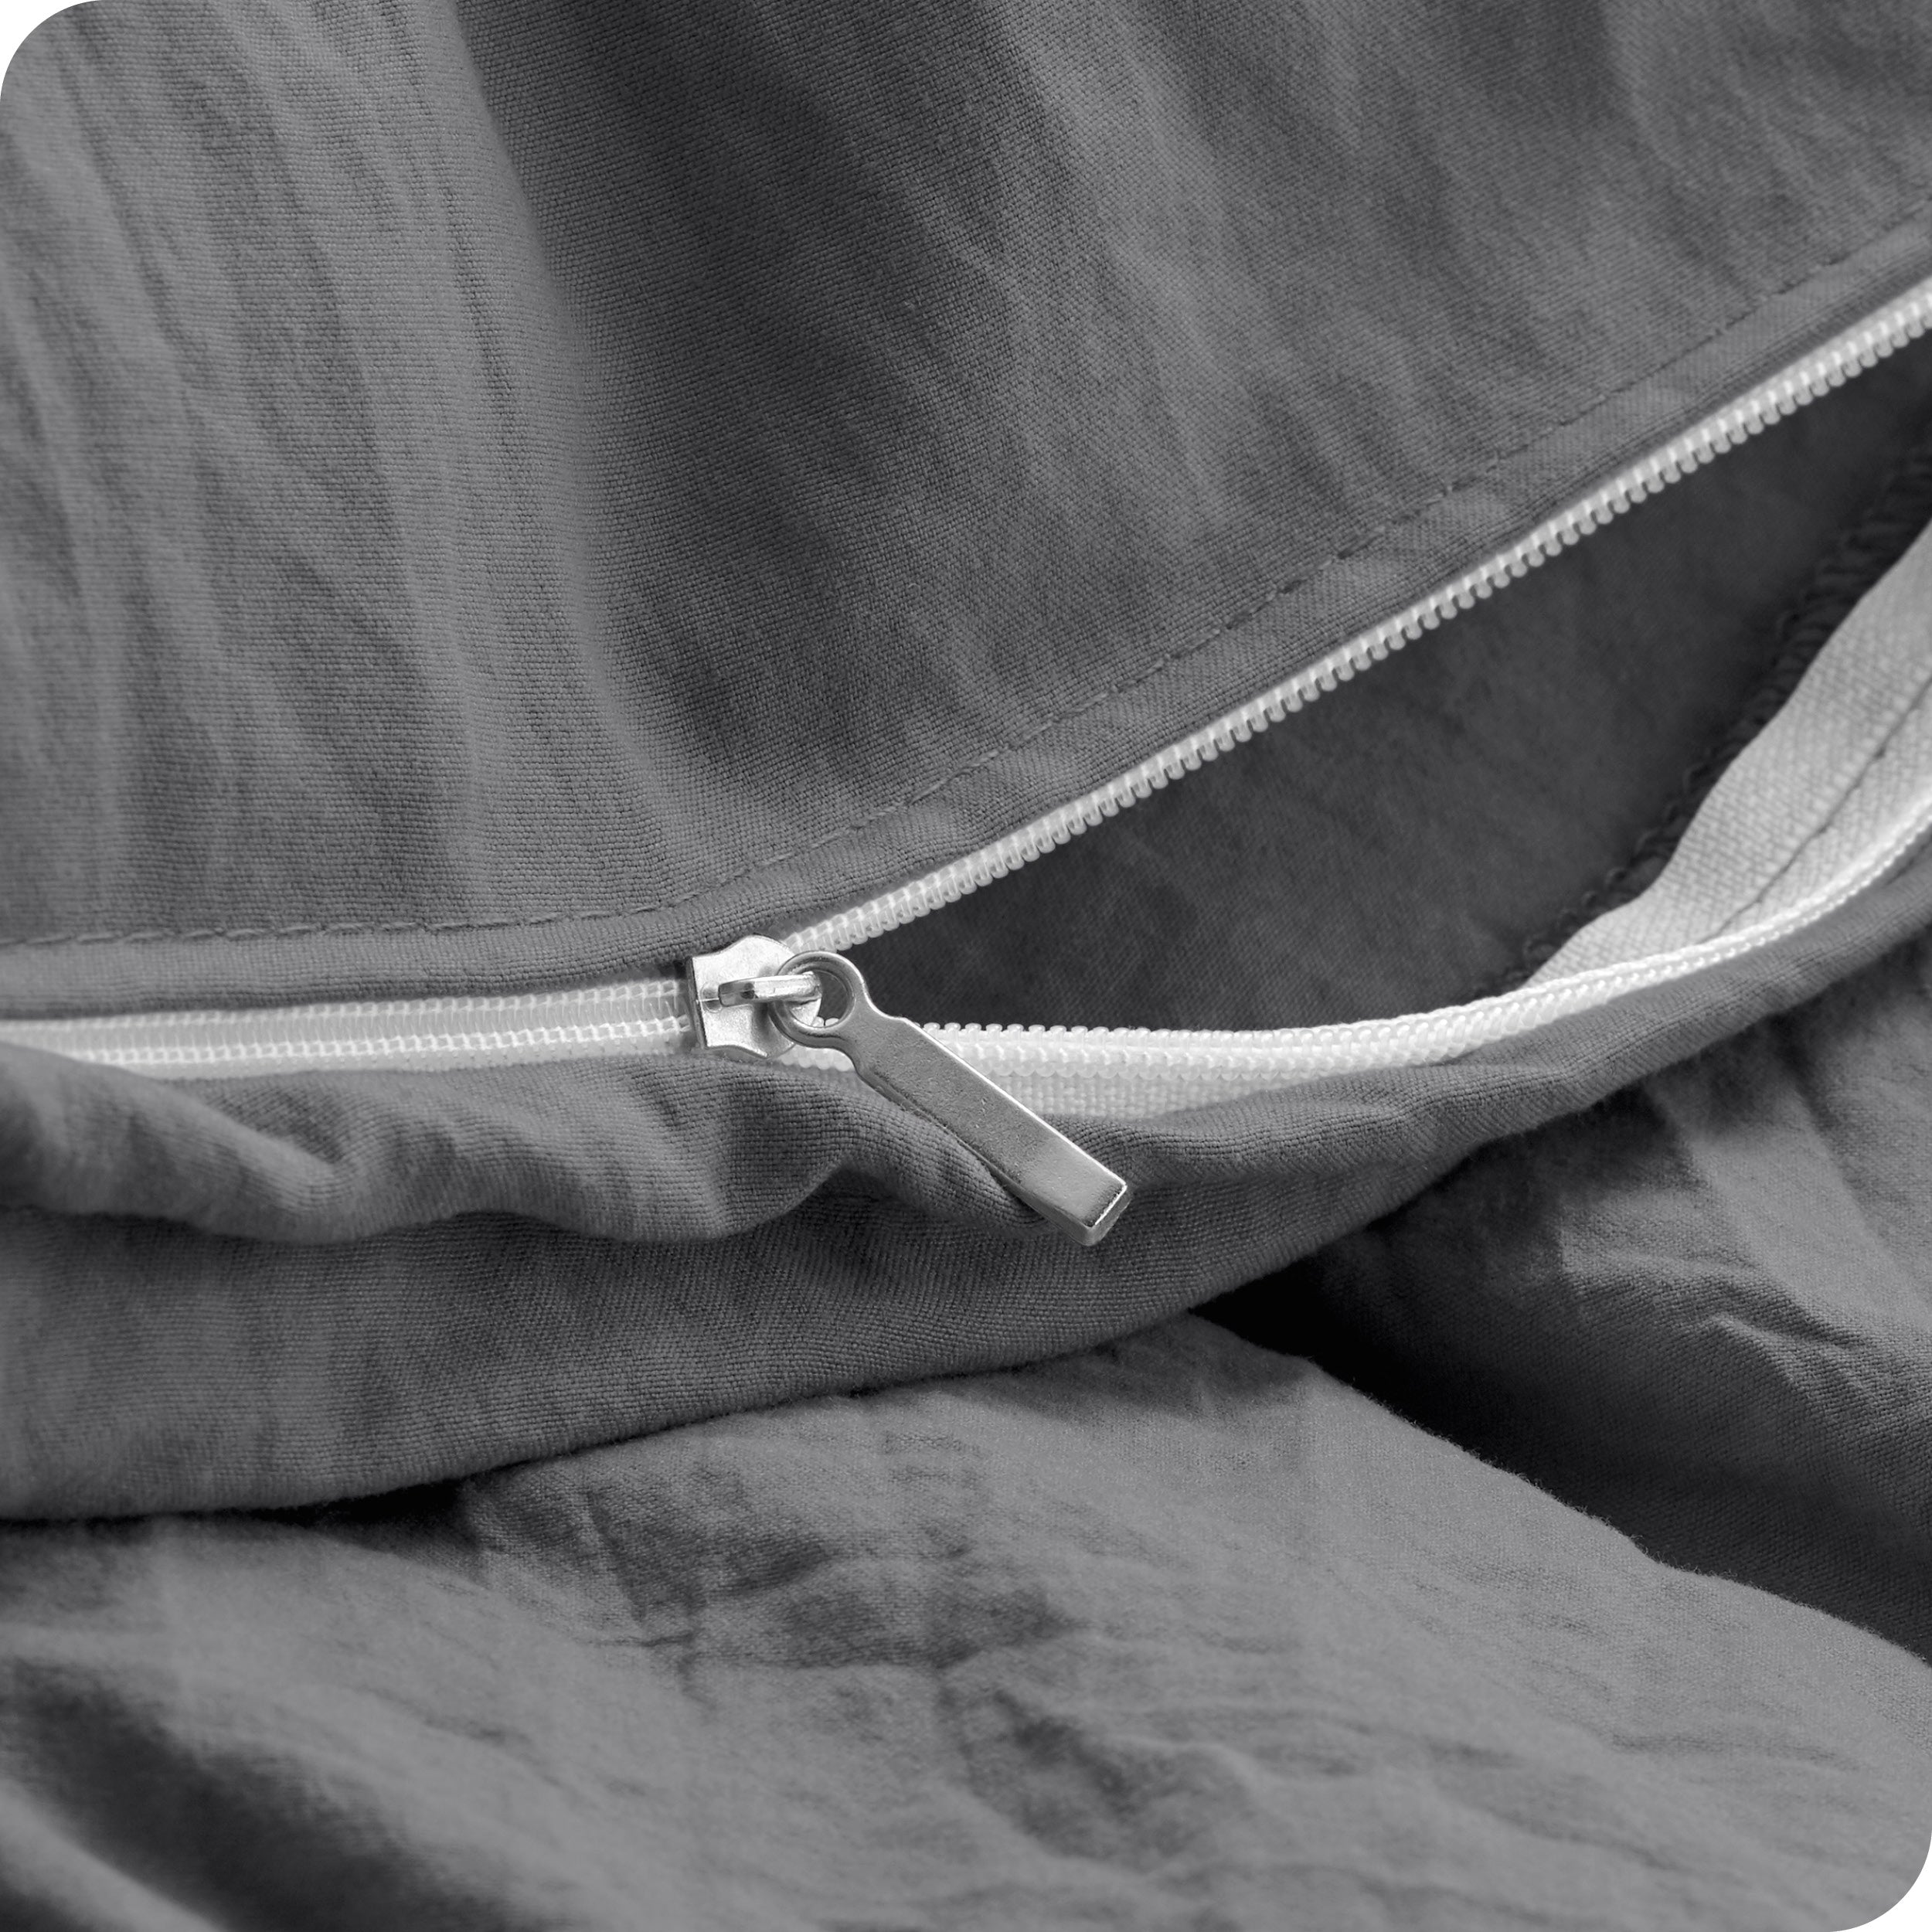 Close up of the zipper on the duvet cover partially opened